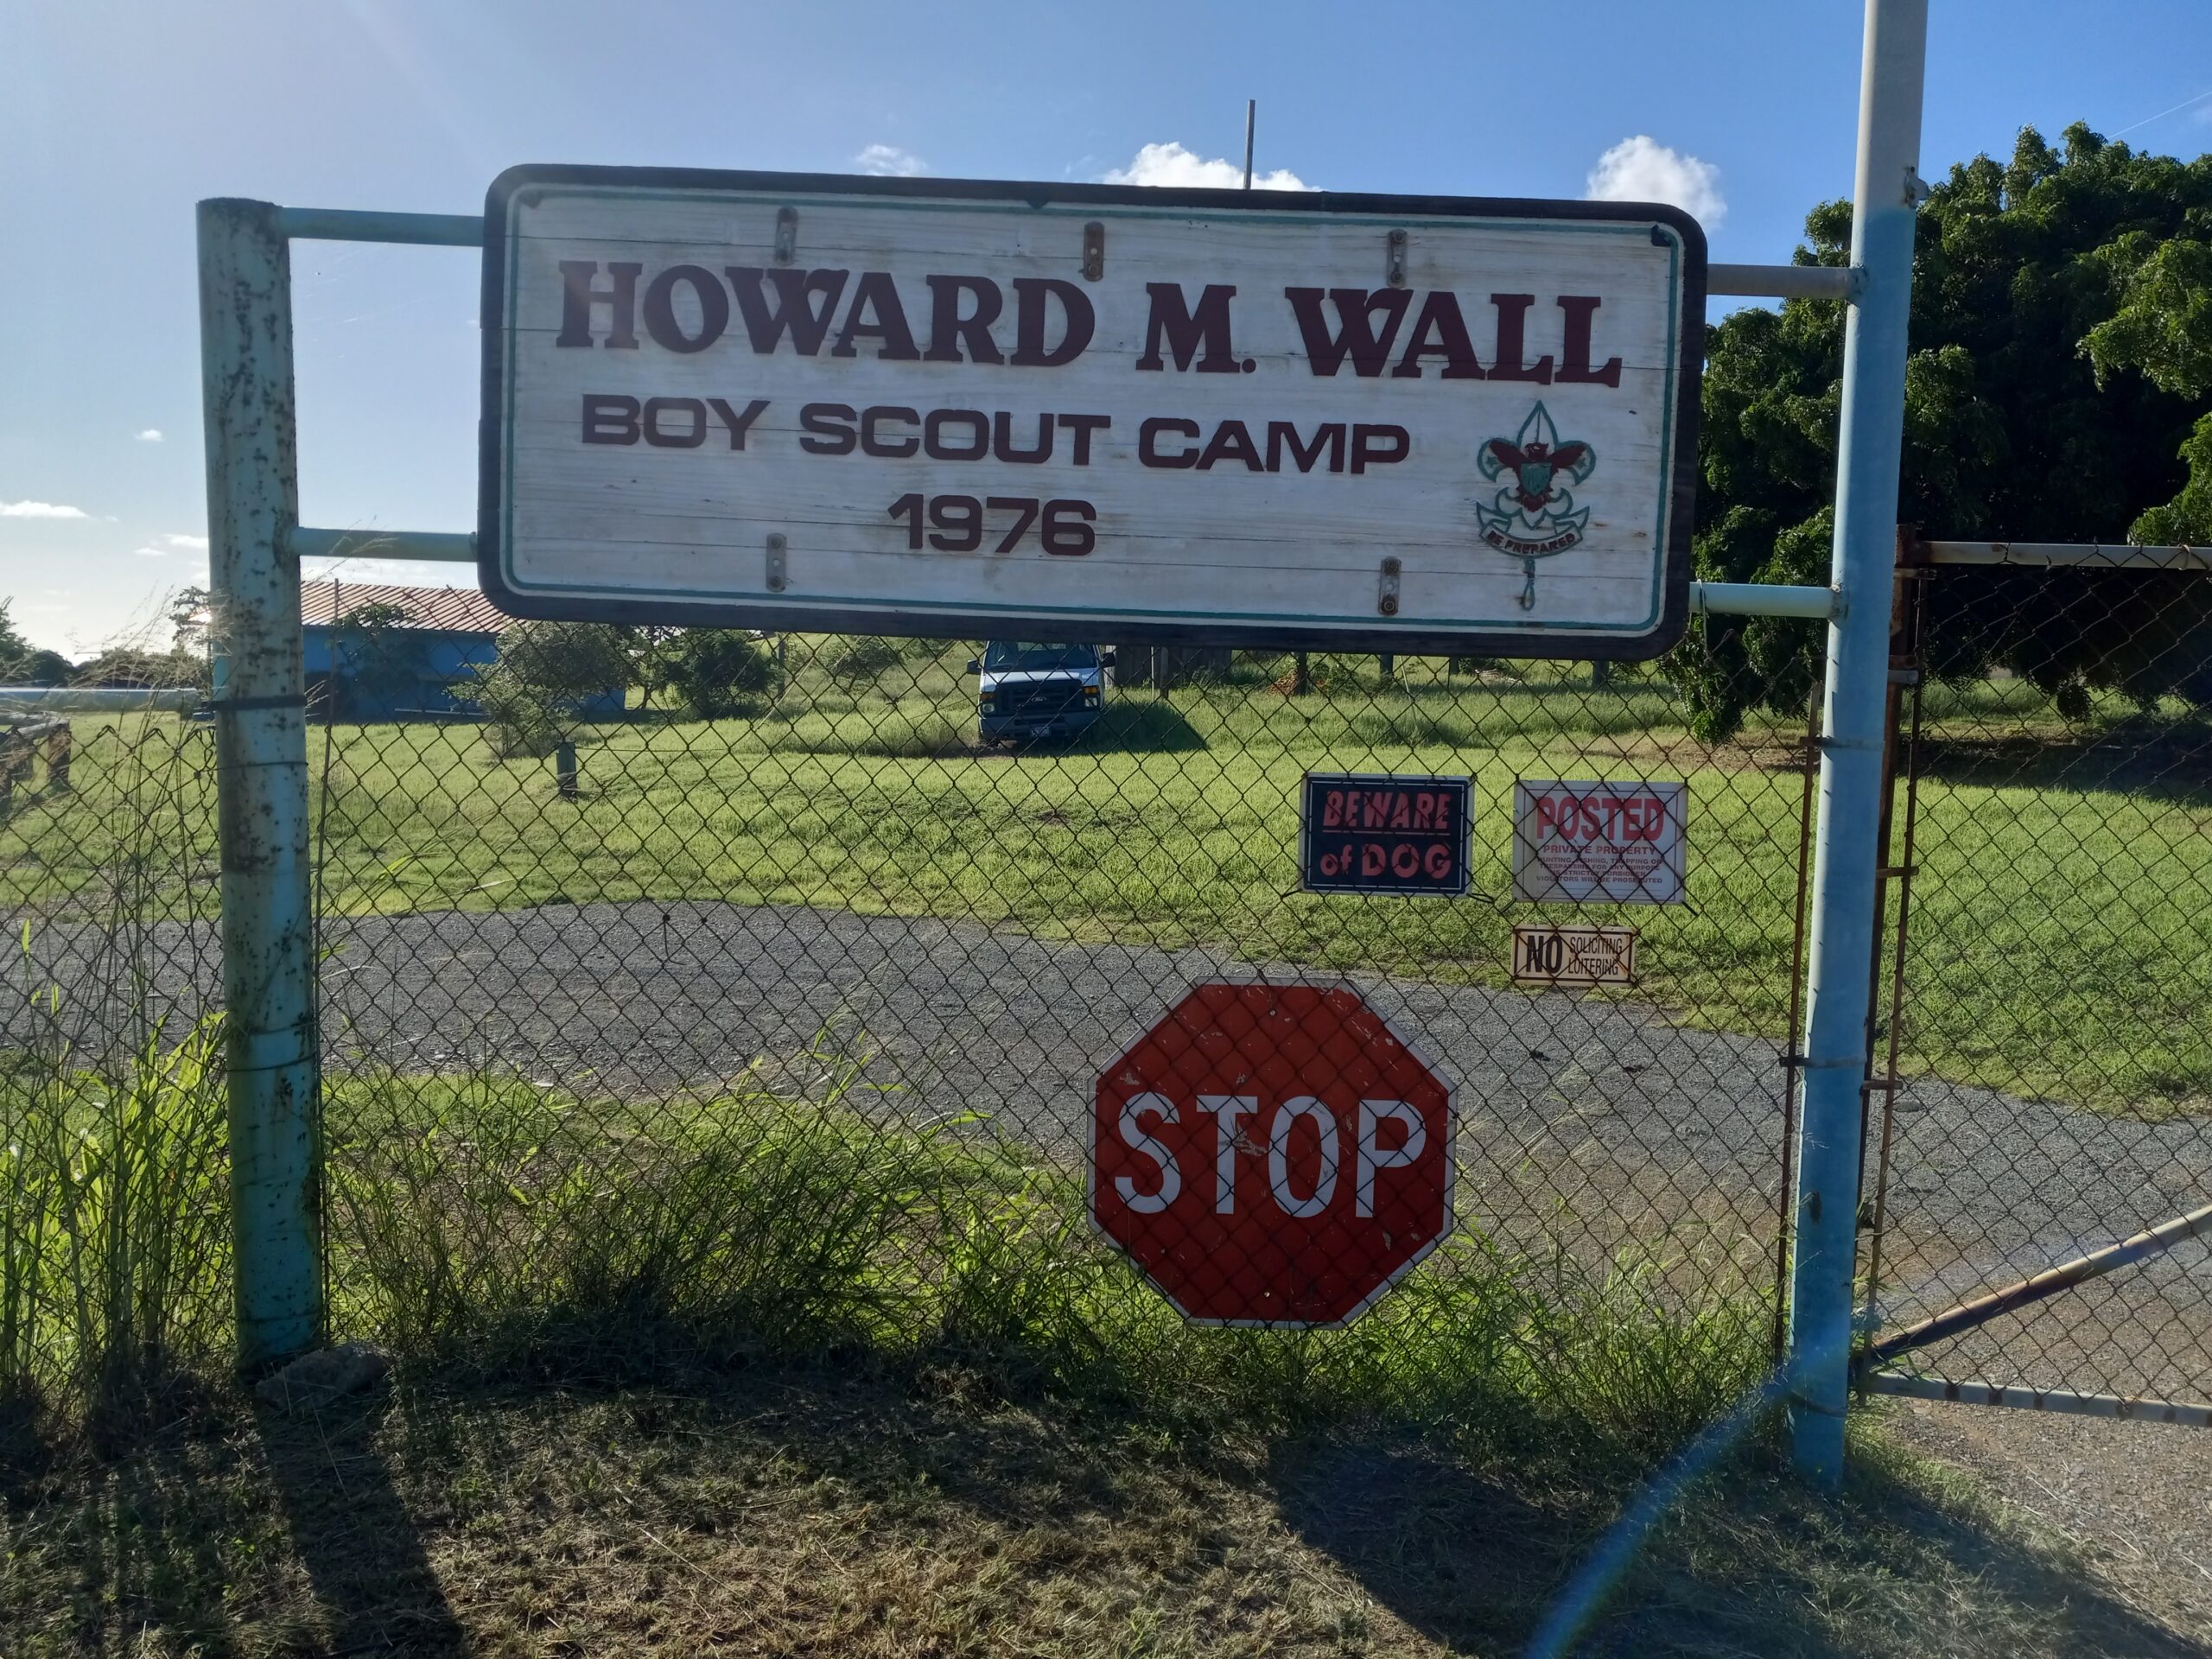 The Howard M. Wall Boy Scout Camp and the shooting range east of Milord Point and west of the Great Pond Bay were once owned by Caroline Gasperi’s parents and are now used by the public. (Photo by Olasee Davis)